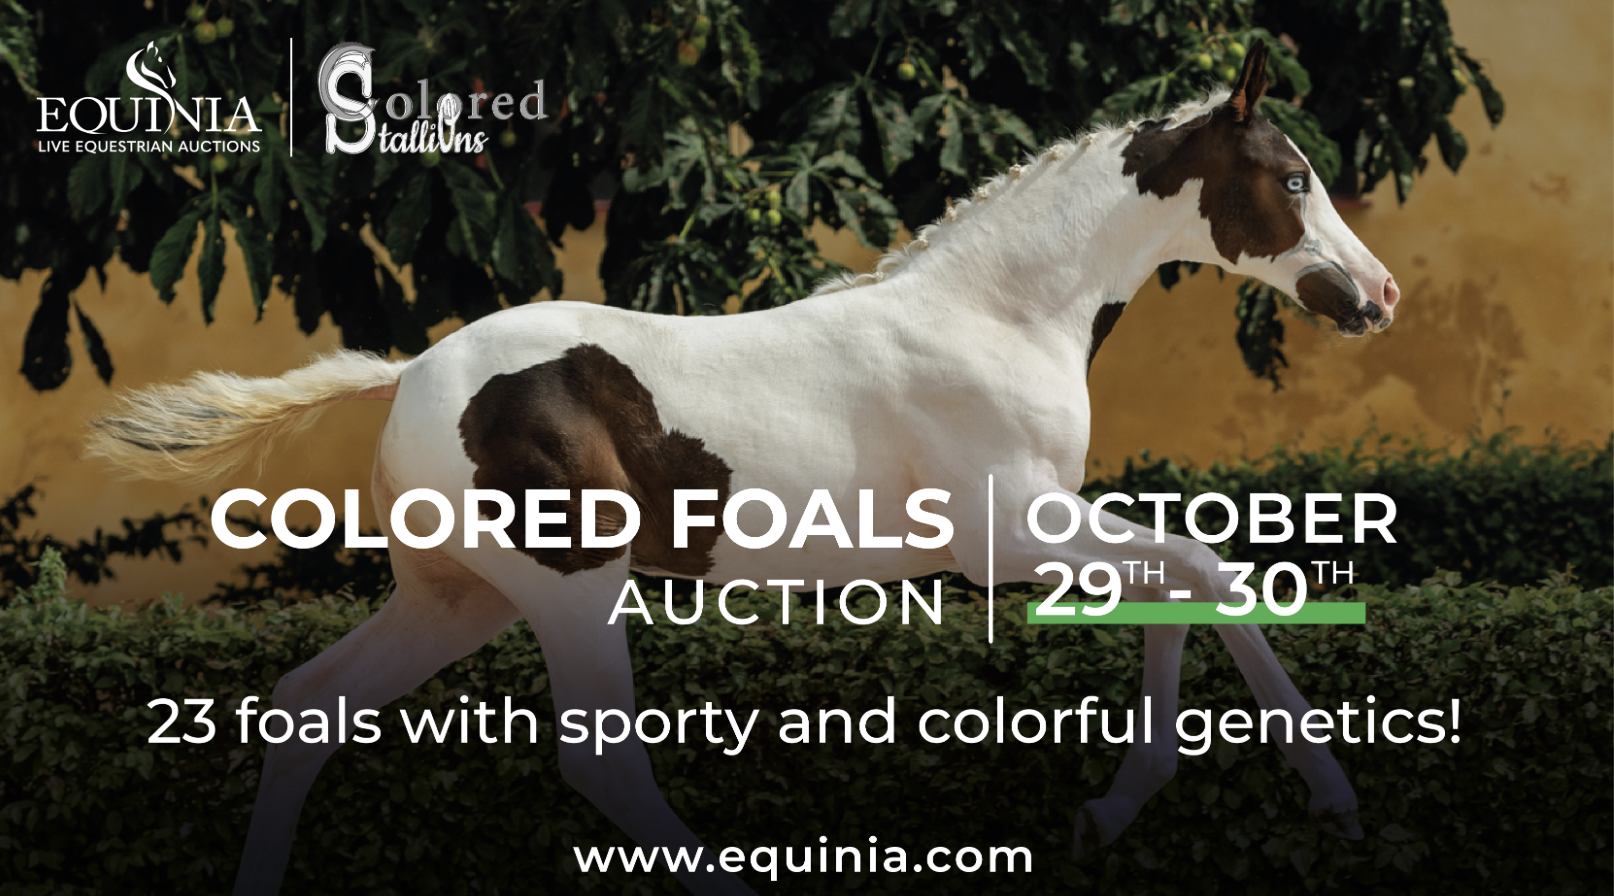 Equinia's Colored Foal Auction: October 29-30, 2023 - A Colorful Online Showcase of Special Colored Foals!